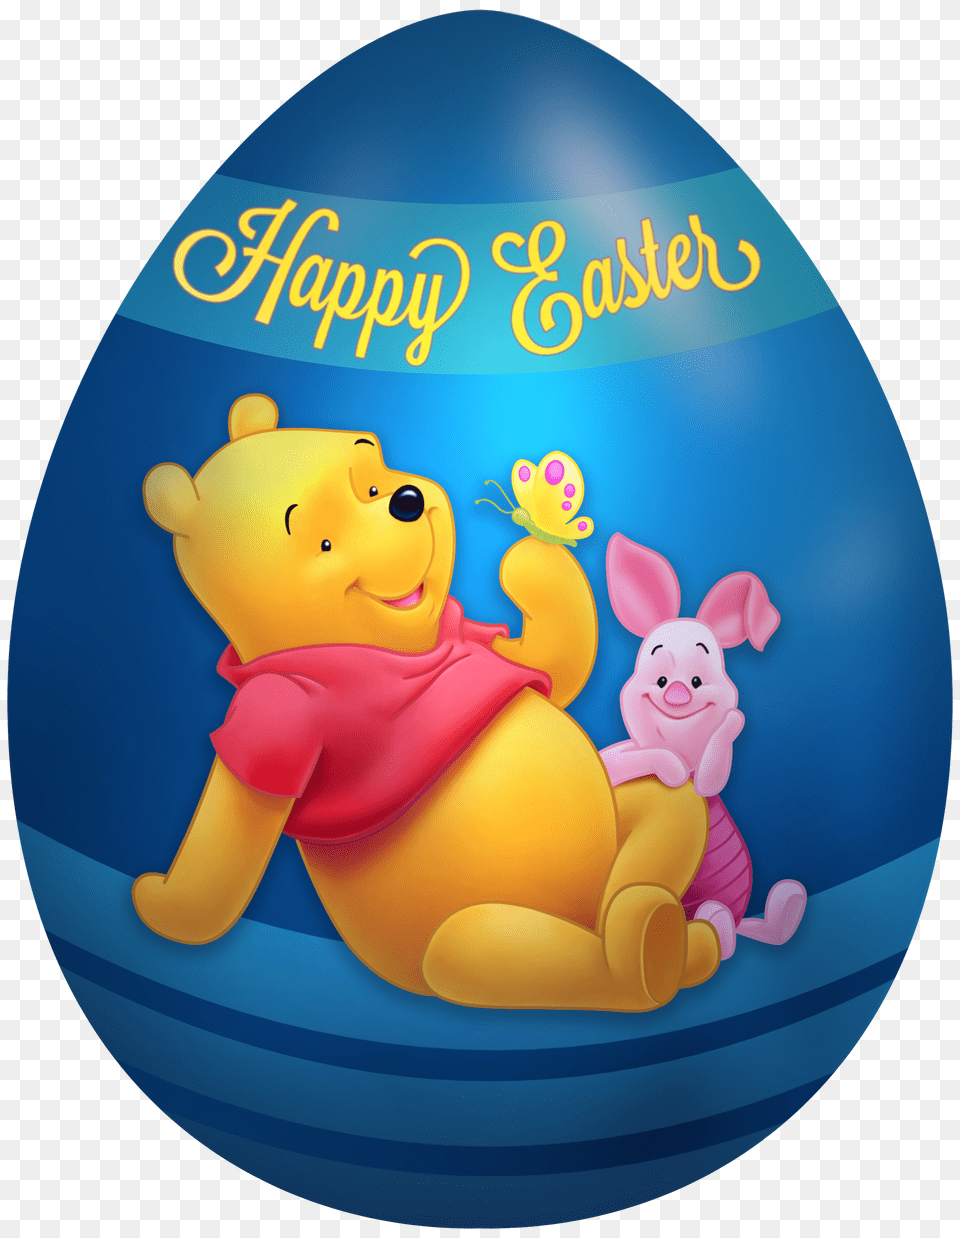 Kids Easter Egg Winnie The Pooh And Piglet Clip Art Png Image